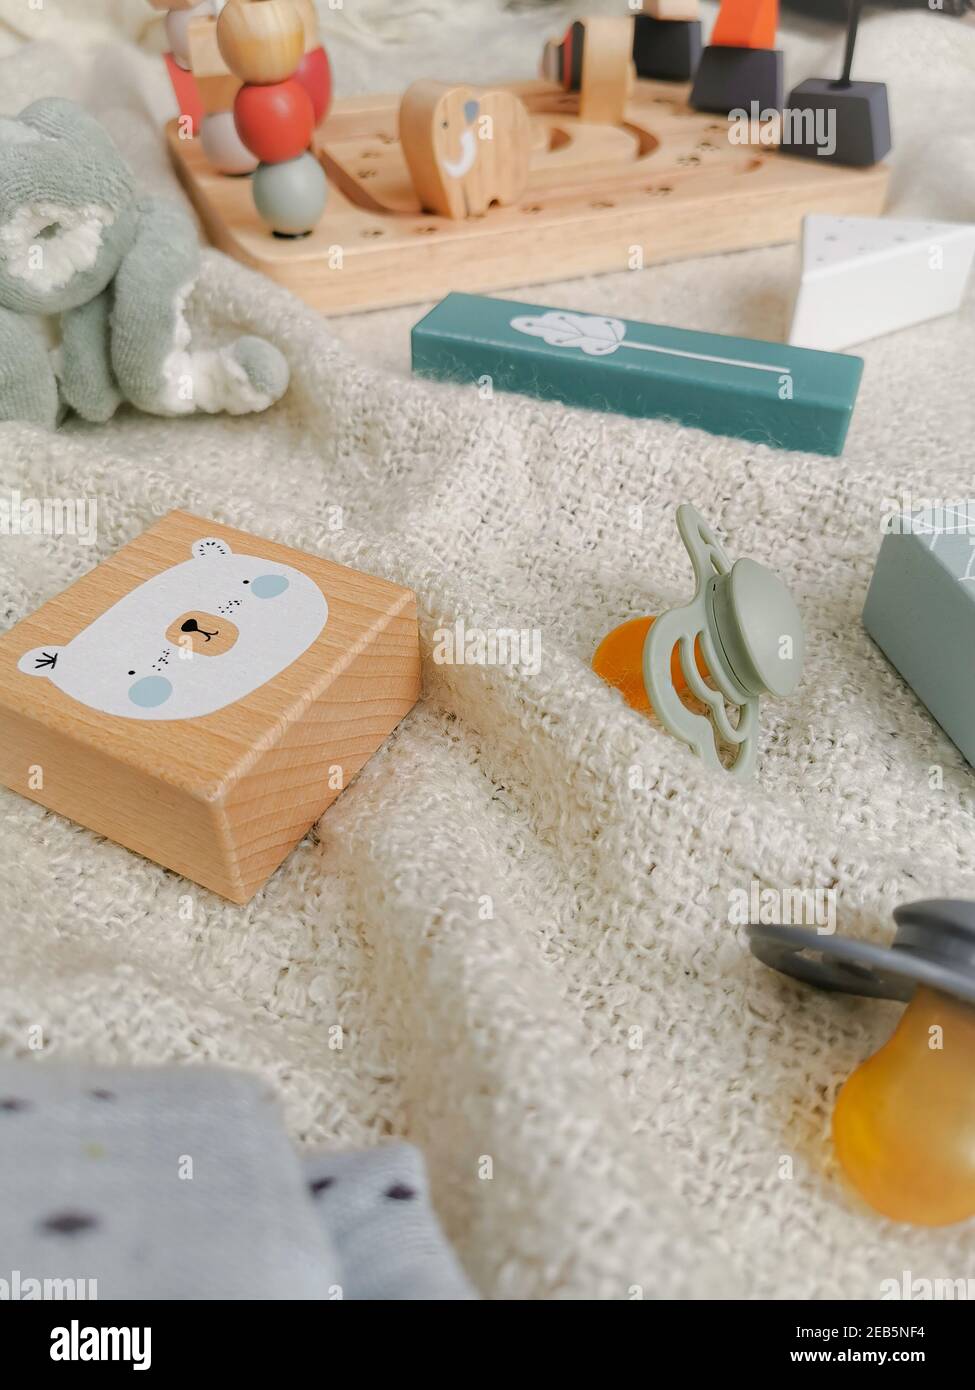 Gender neutral toys for babies in muted soft colors such as wooden blocks and pacifiers. Gender neutral parenting. Stock Photo